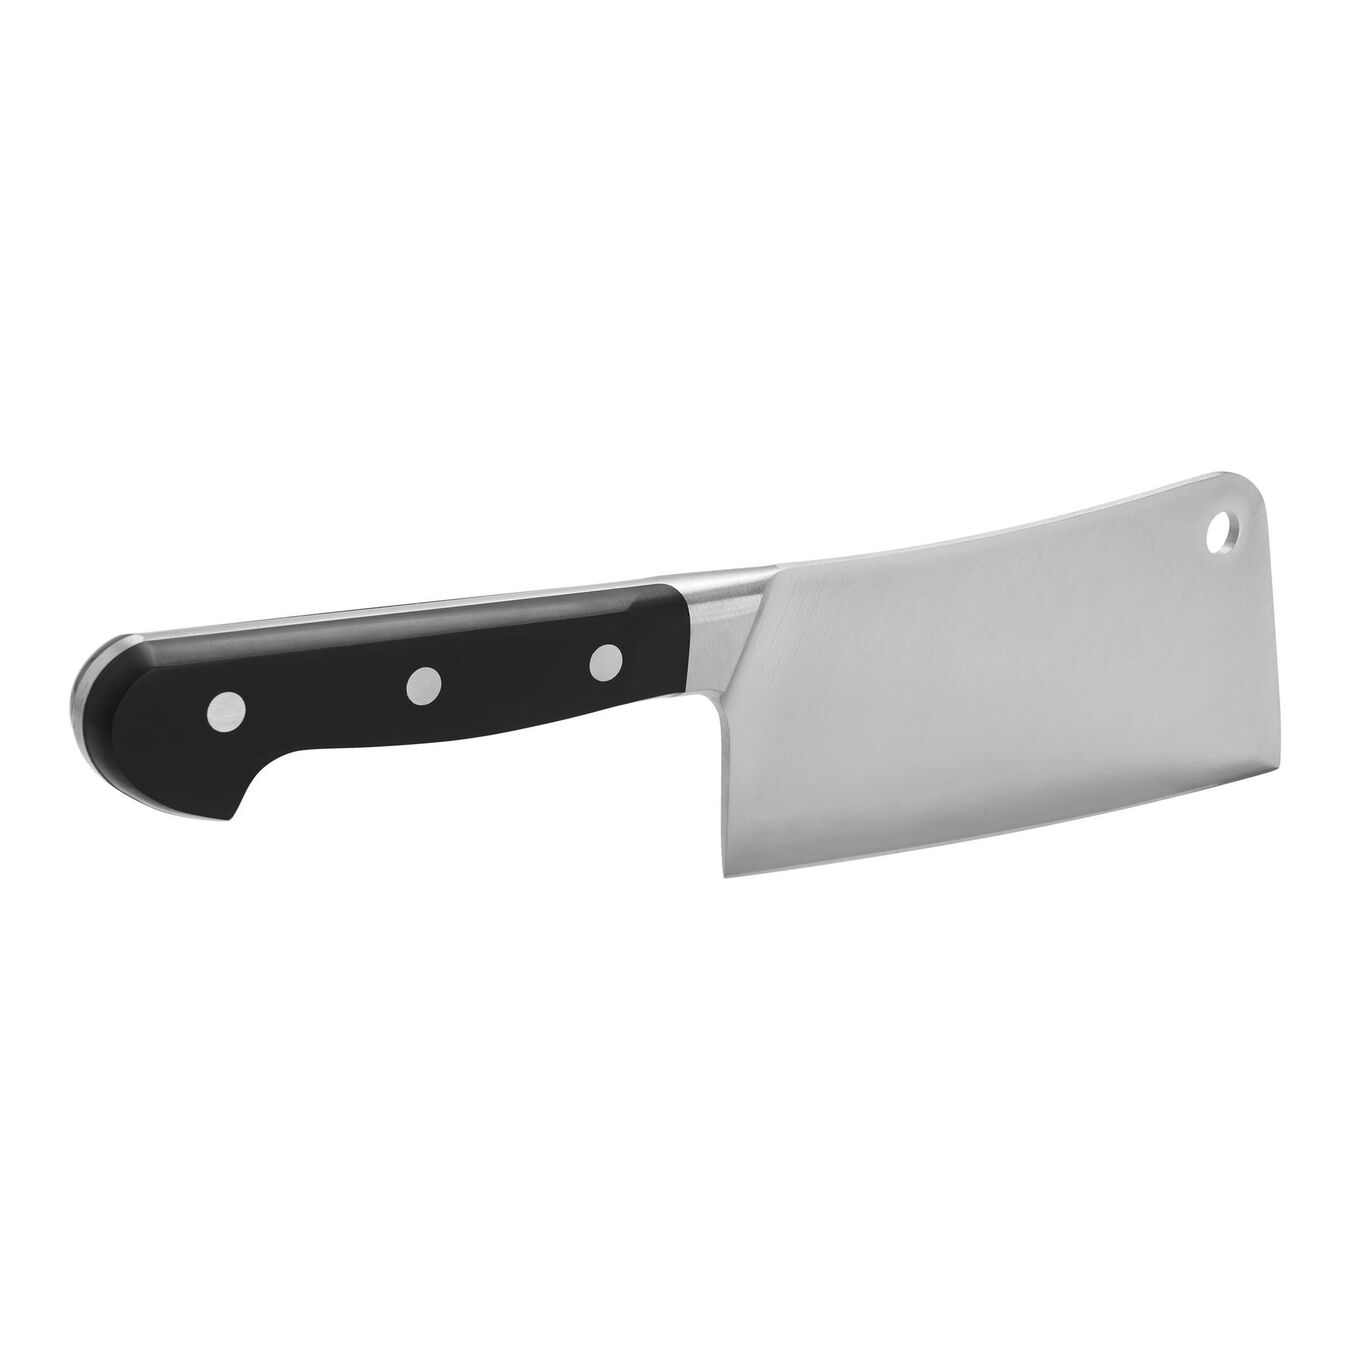 6.5 inch Cleaver - Visual Imperfections,,large 6